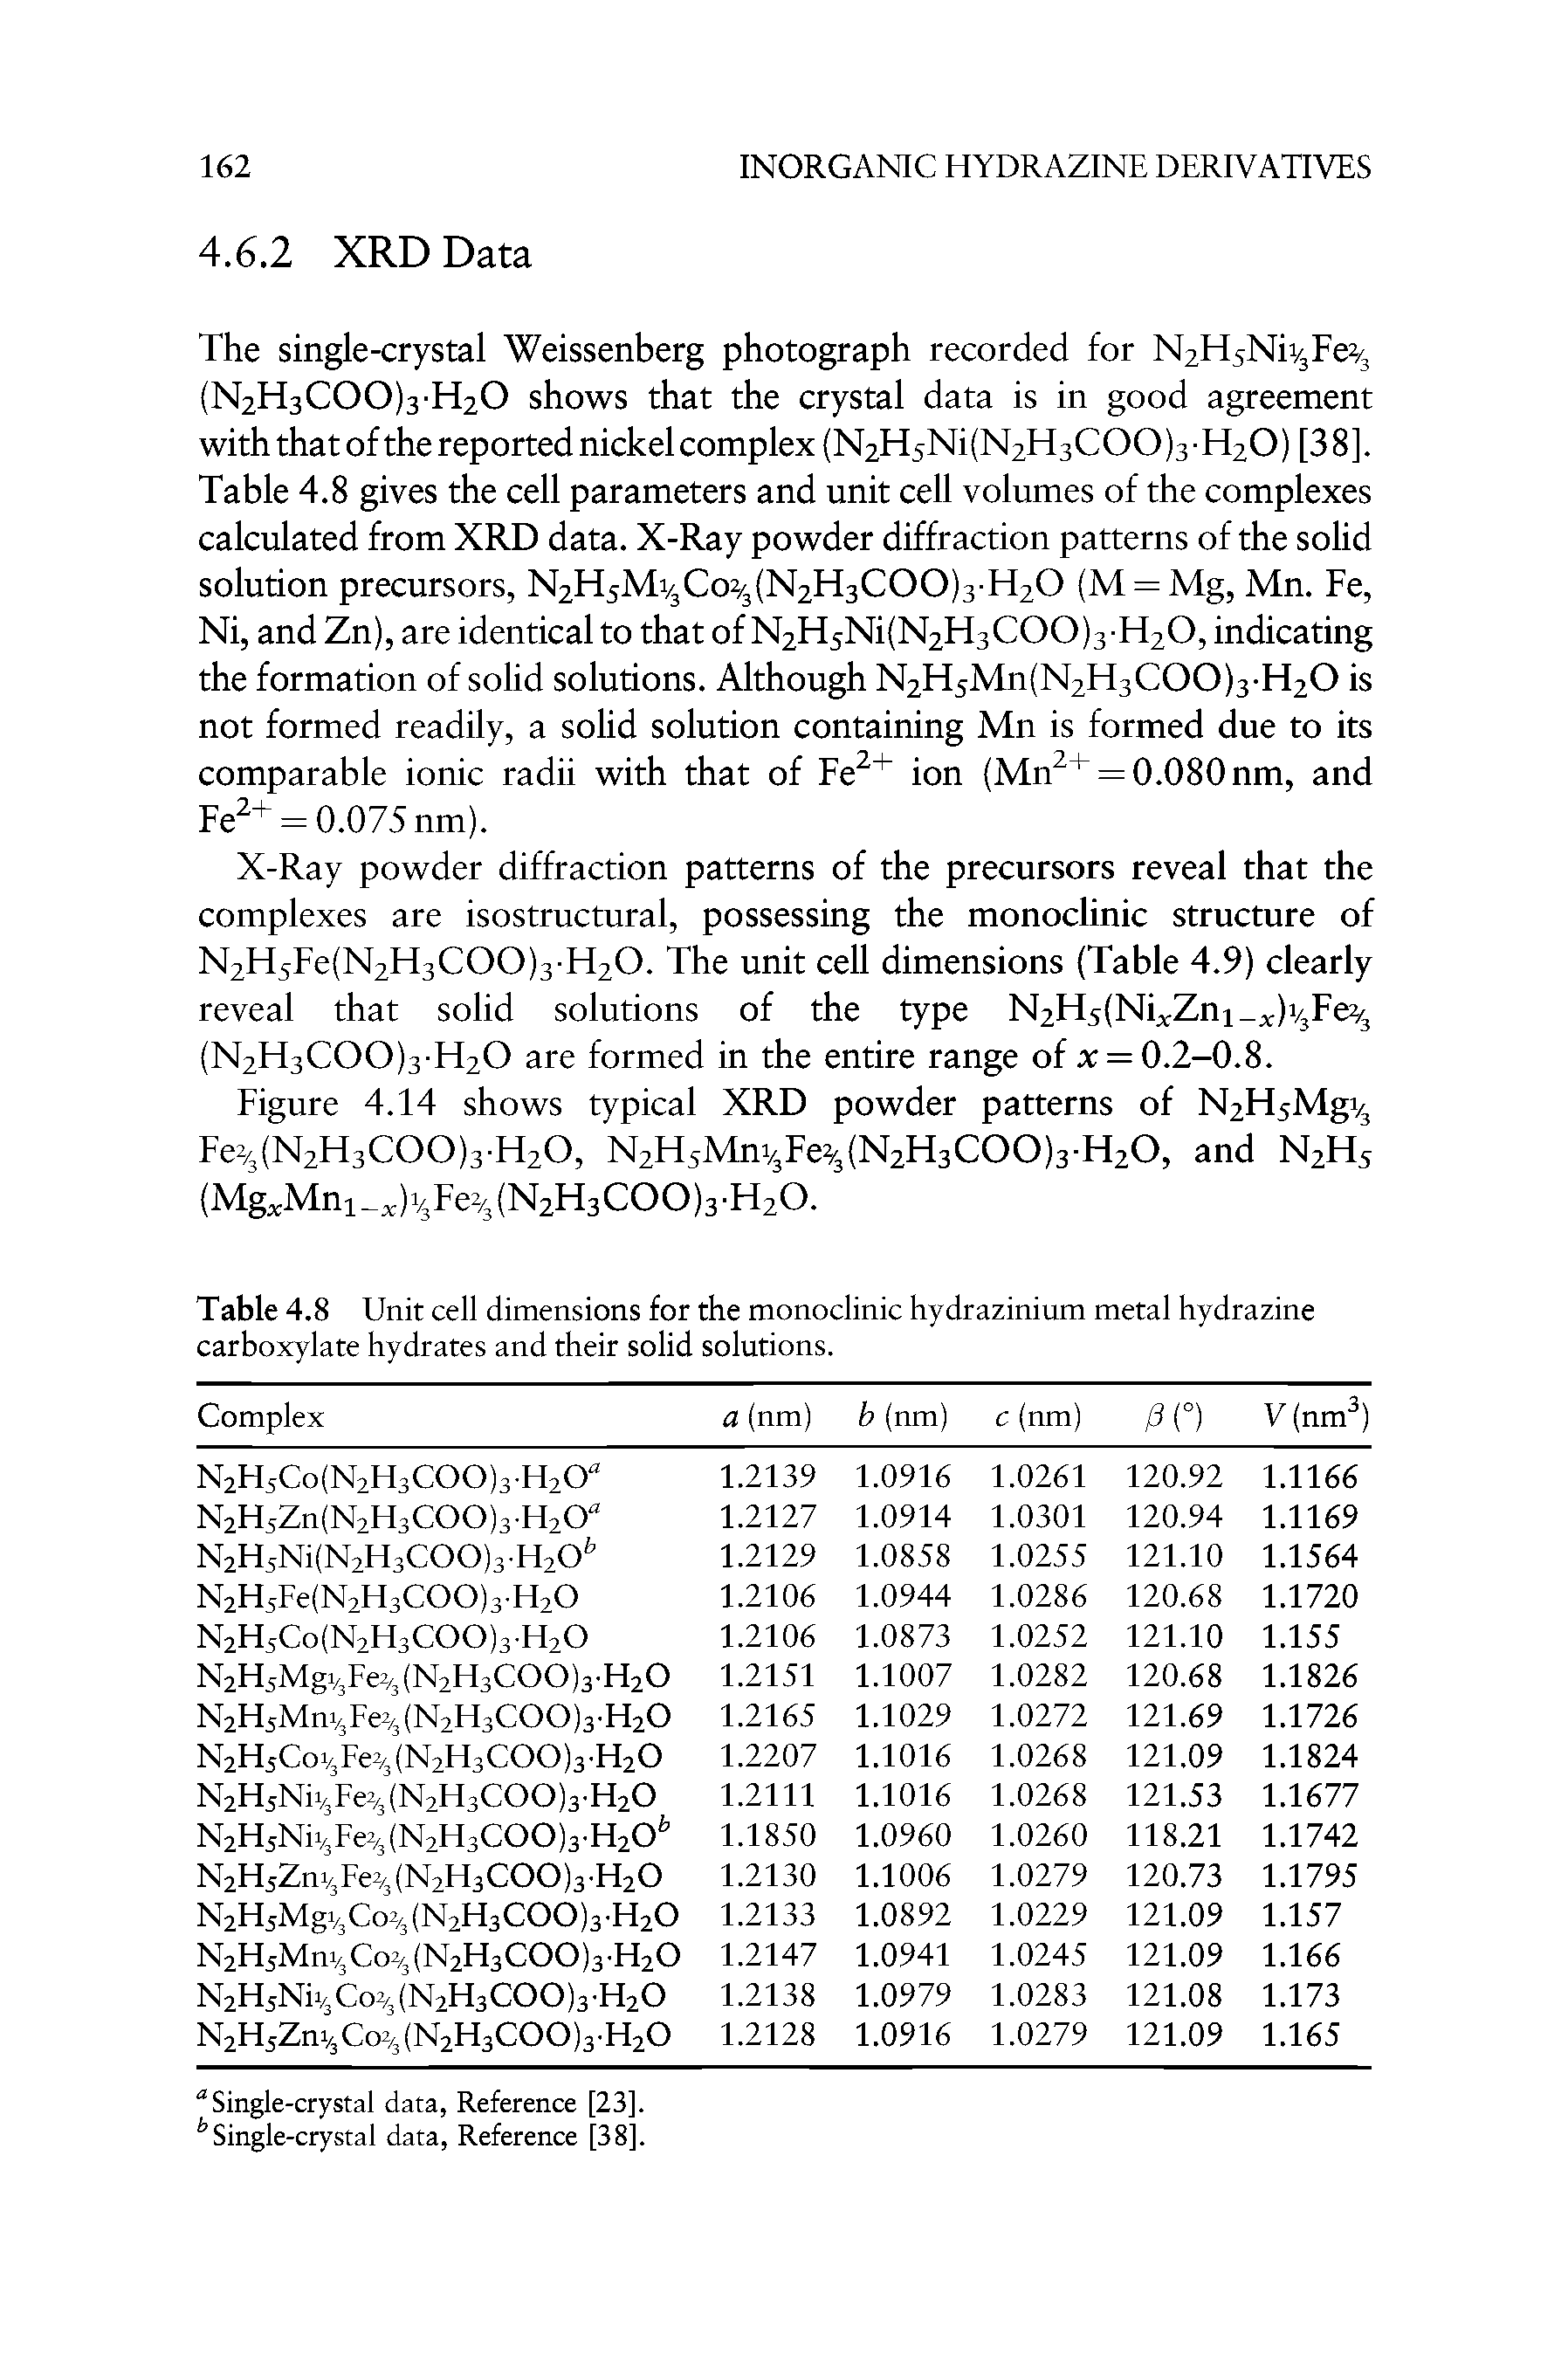 Table 4.8 Unit cell dimensions for the monoclinic hydrazinium metal hydrazine carboxylate hydrates and their solid solutions.